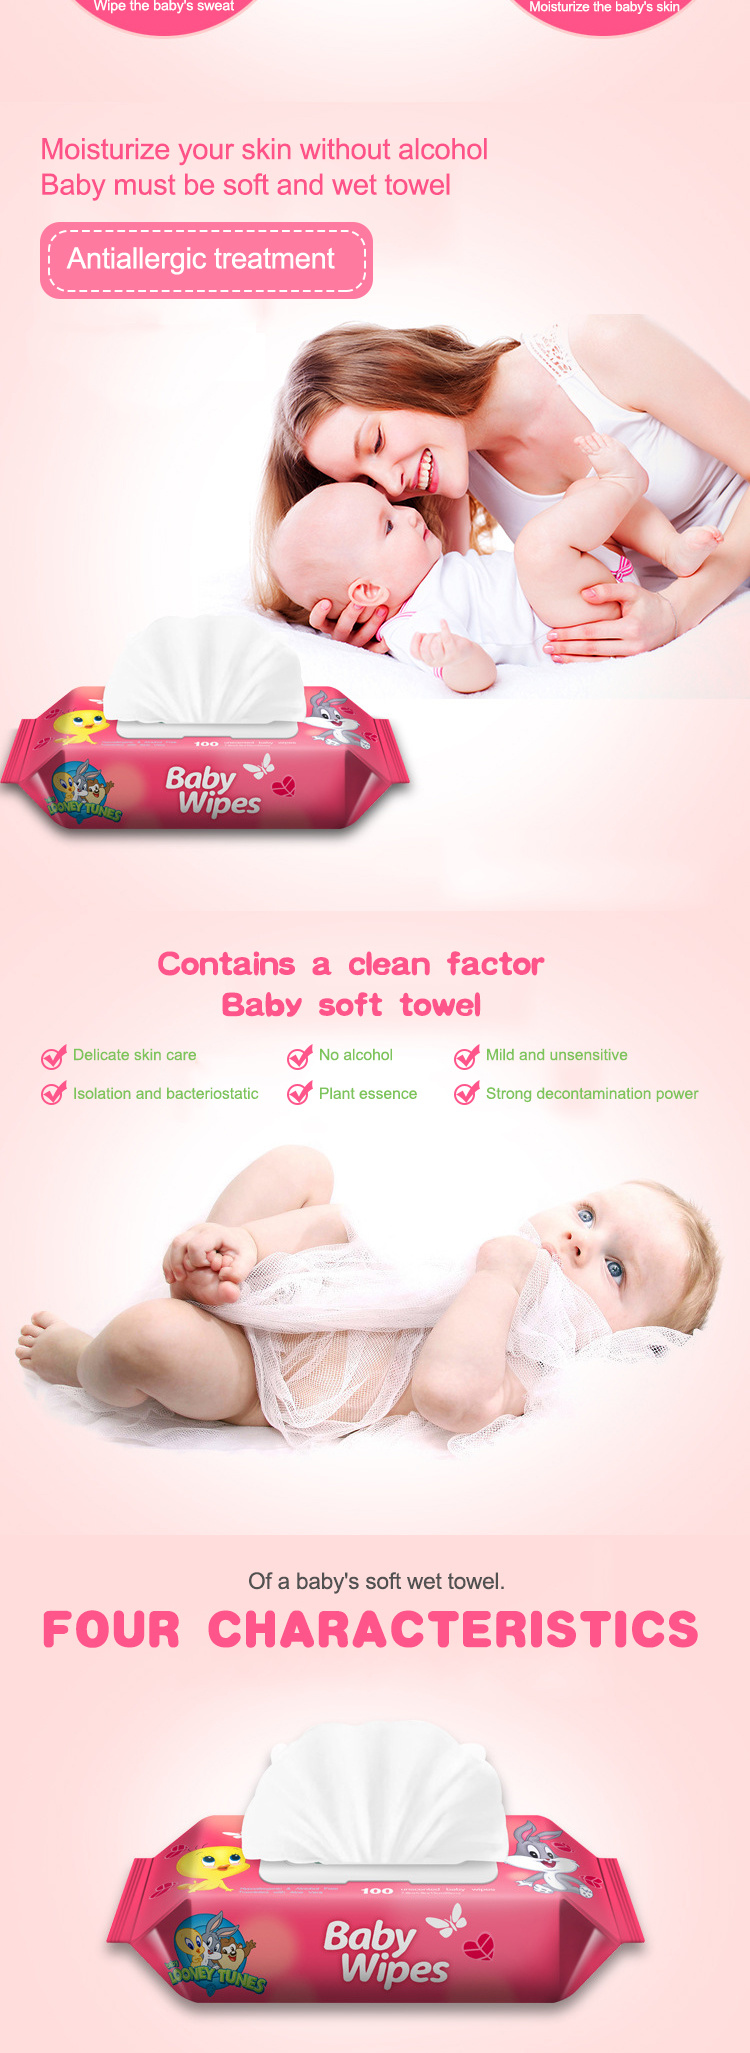 Baby Wipes Bulk Baby Wipes Best Baby Wipes Good for Cleaning Baby Wipes Box Cover Baby Wipes for Face